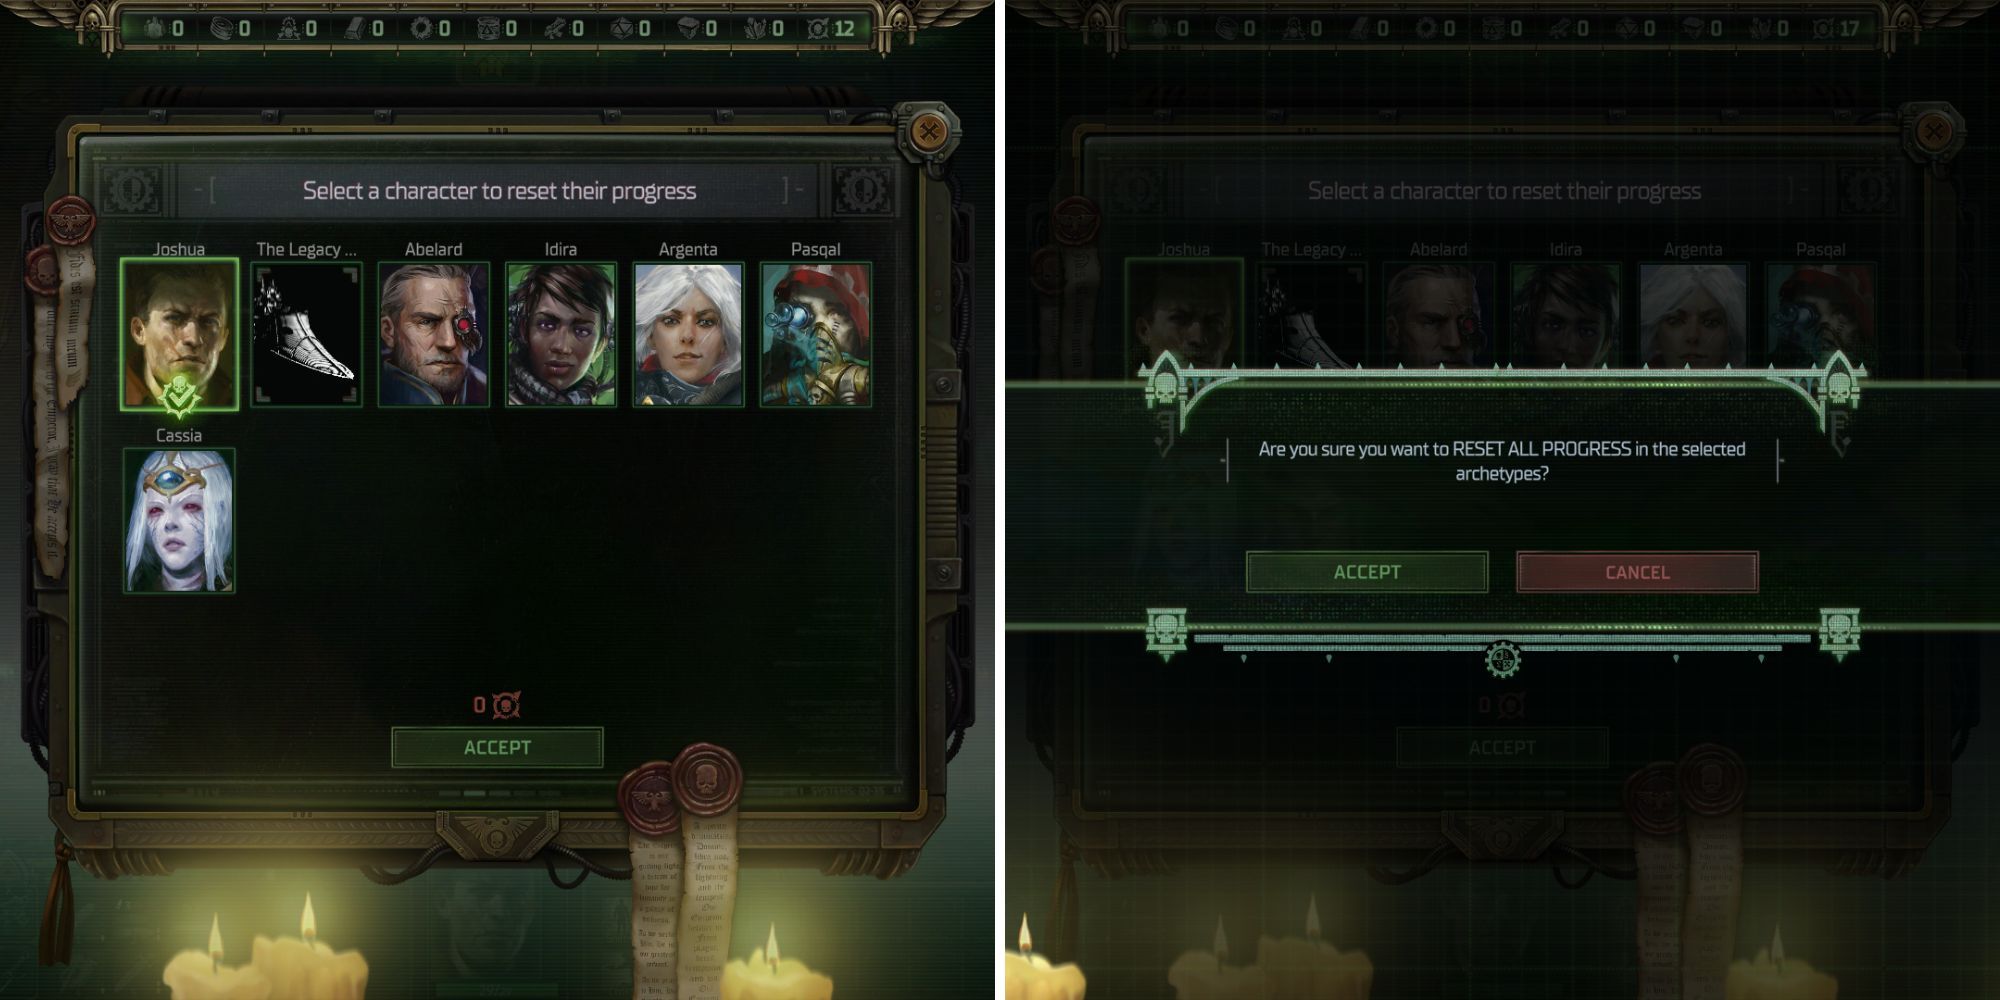 The Respecing Menu In ROgue Trader